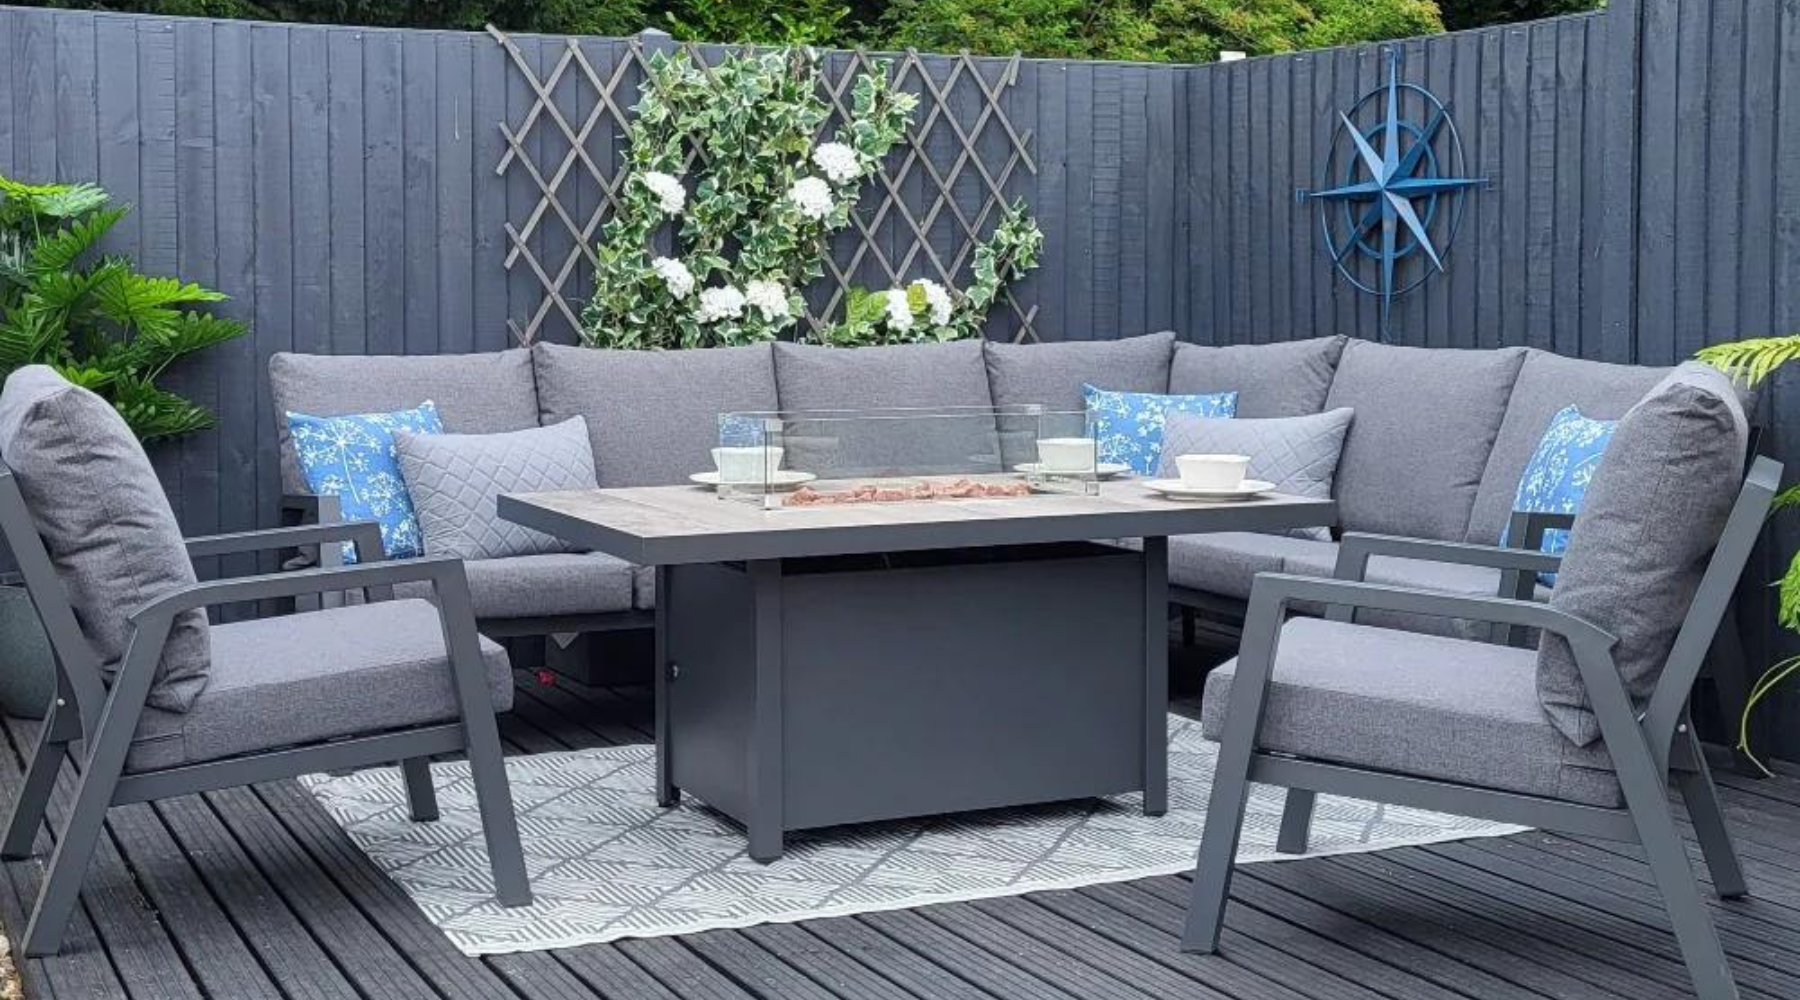 The Importance of Quality Garden Furniture